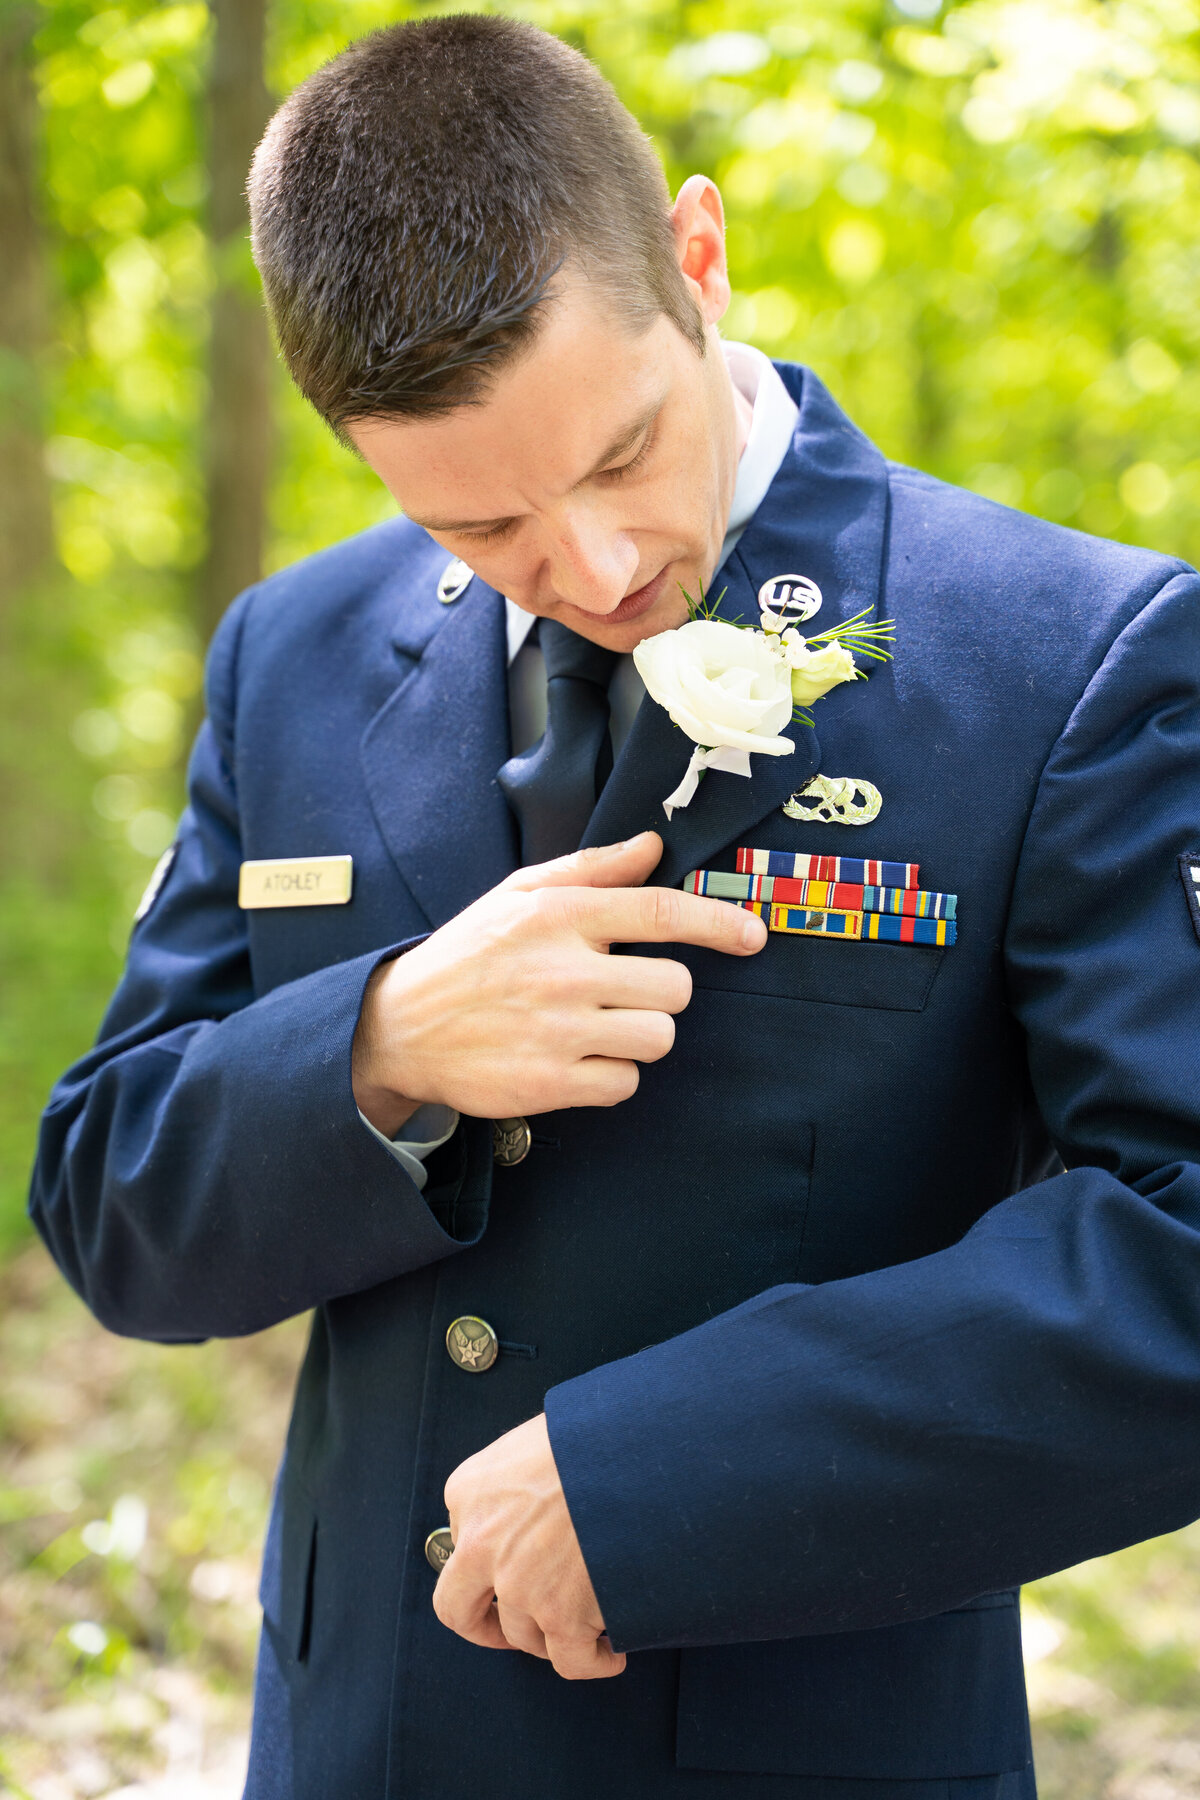 The groom, Beau Atchley, in his military uniform describing the meaning of the symbols on his jacket are at his wedding at Cheers Chalet in Lancaster, Ohio.